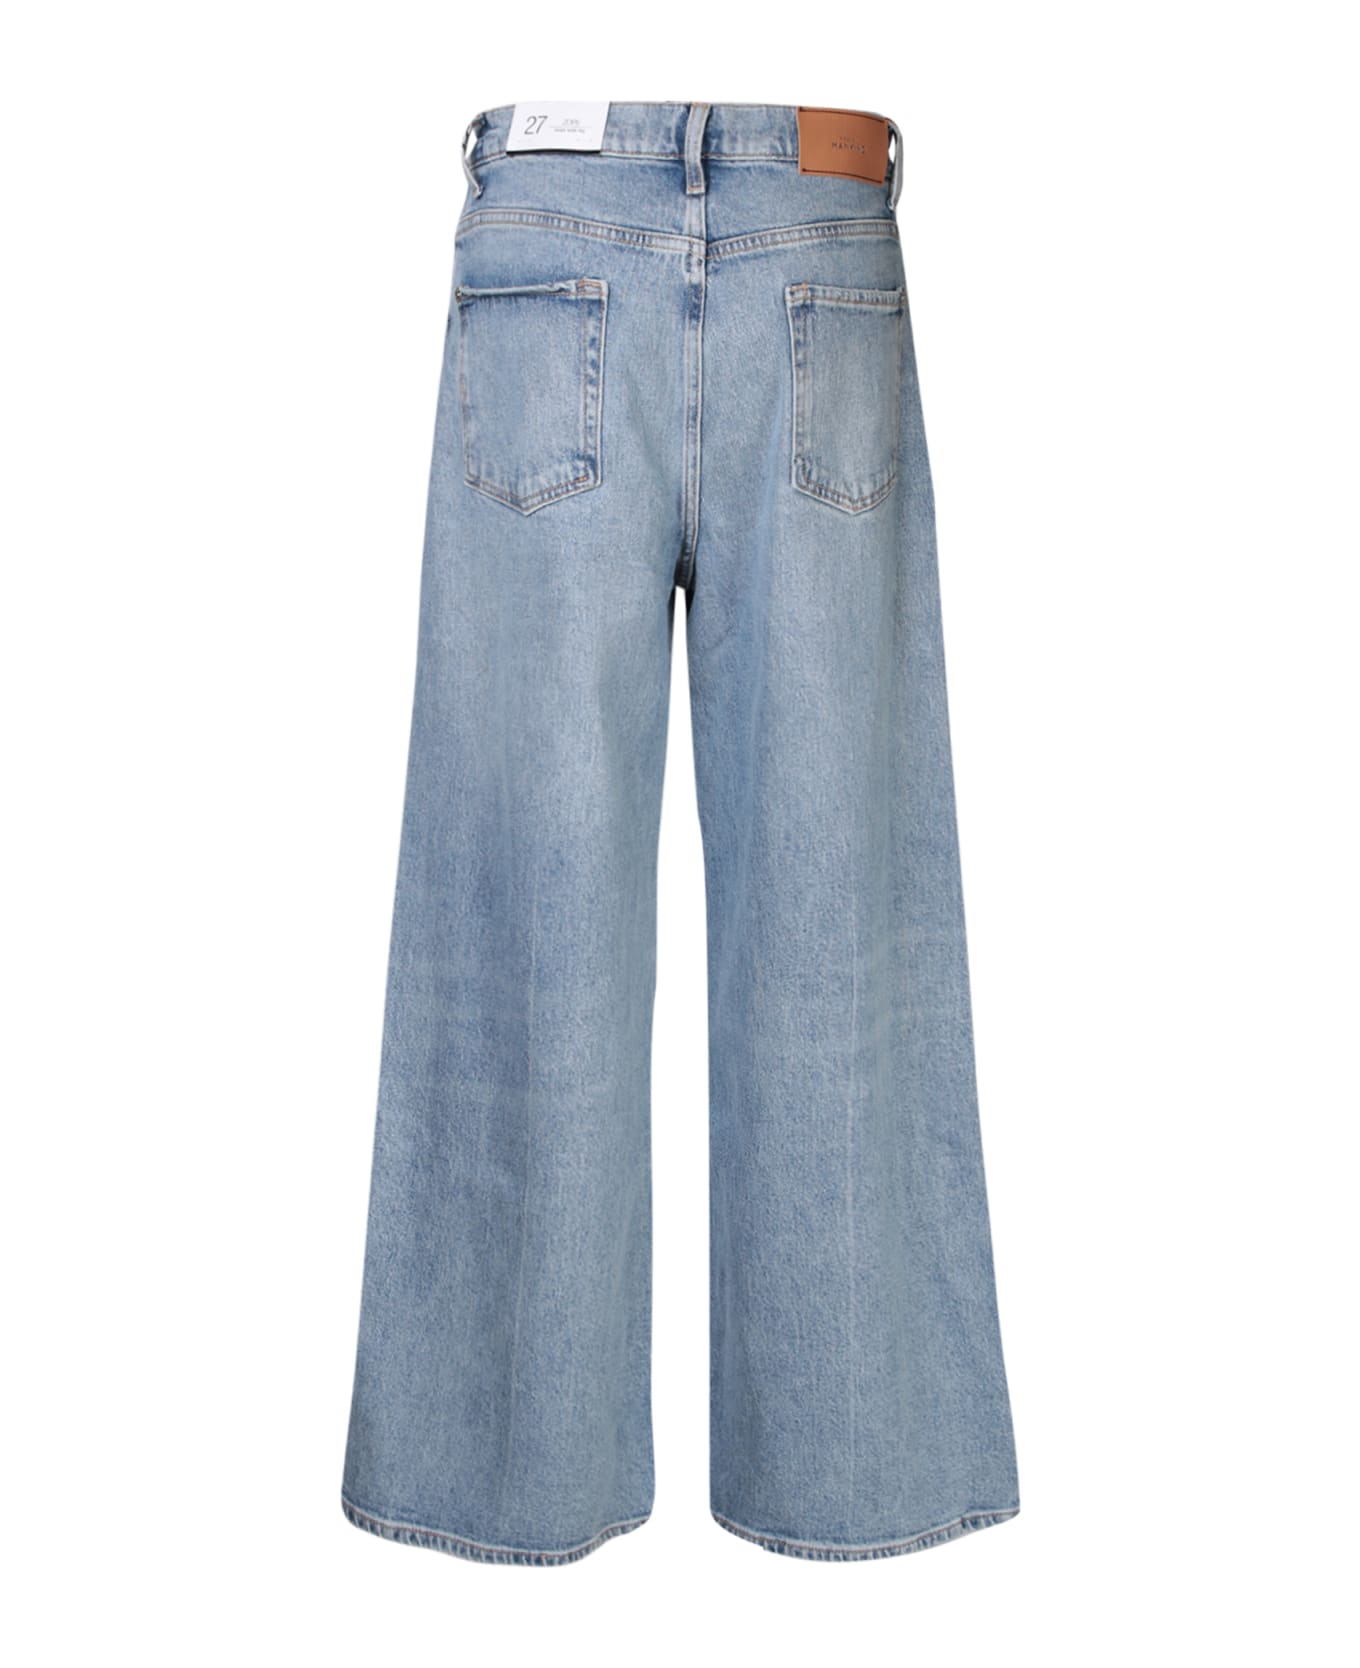 7 For All Mankind Zoey Wide Leg Light Blue Jeans - Blue デニム